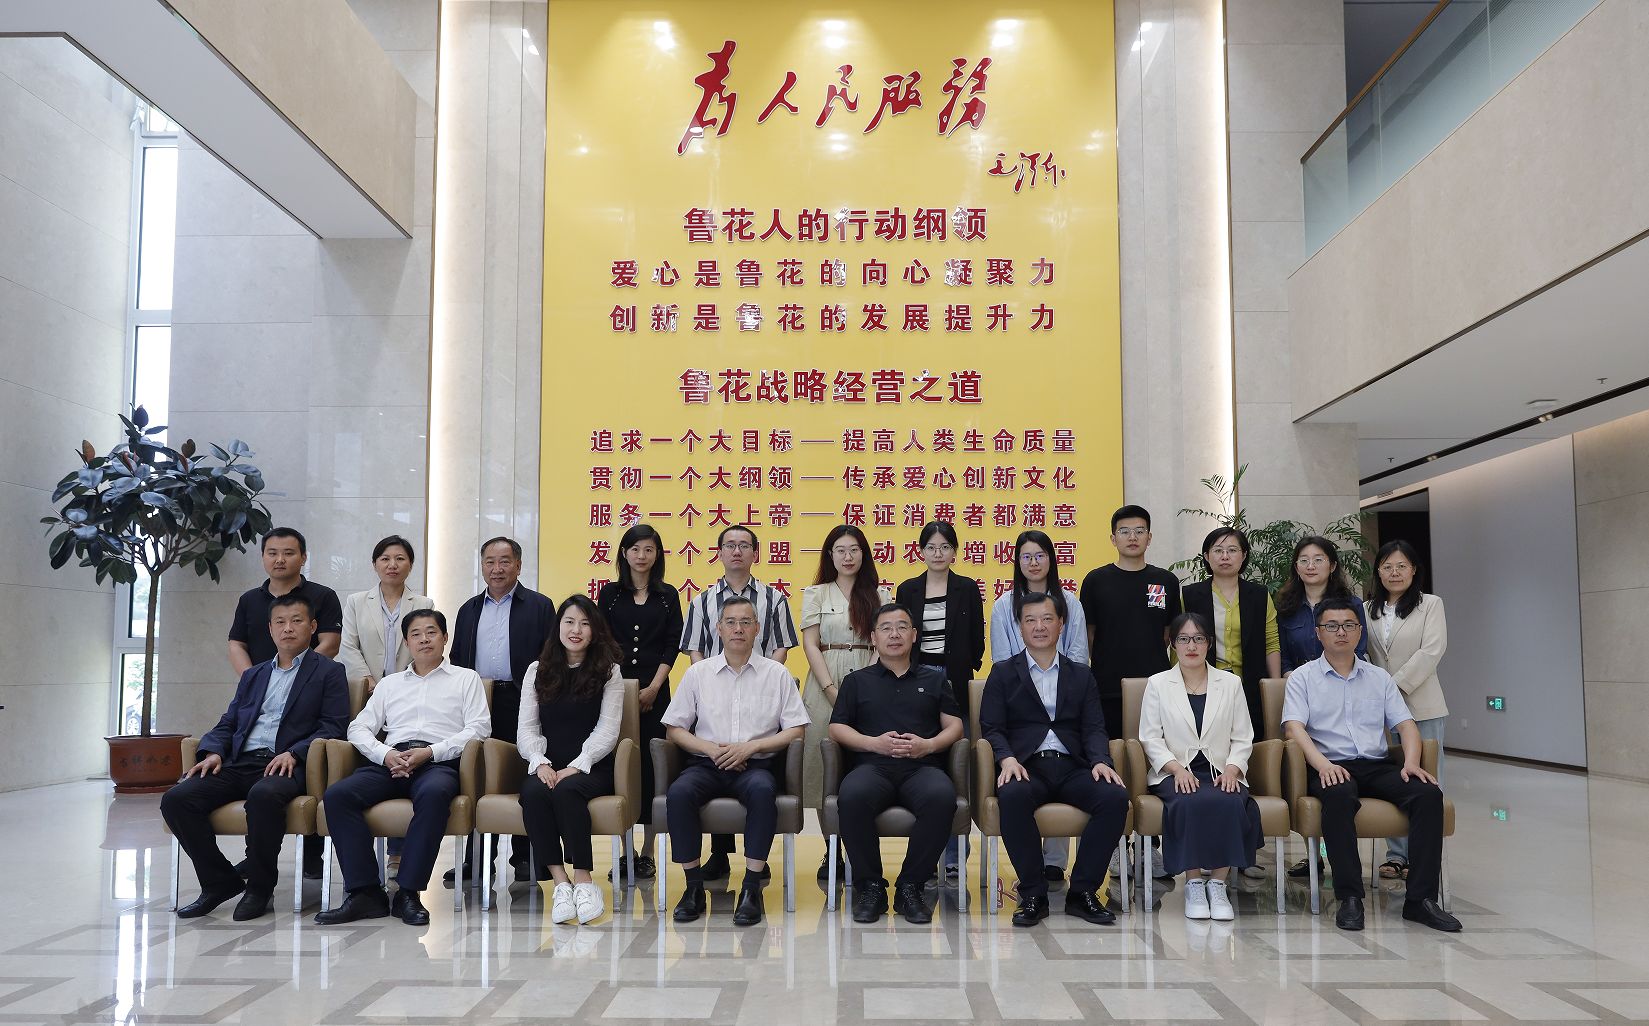  The launch and promotion meeting of Shandong Province's major scientific and technological innovation project "High oleic peanut oil processing and value-added utilization technology research and development" was successfully held in Luhua, Laiyang